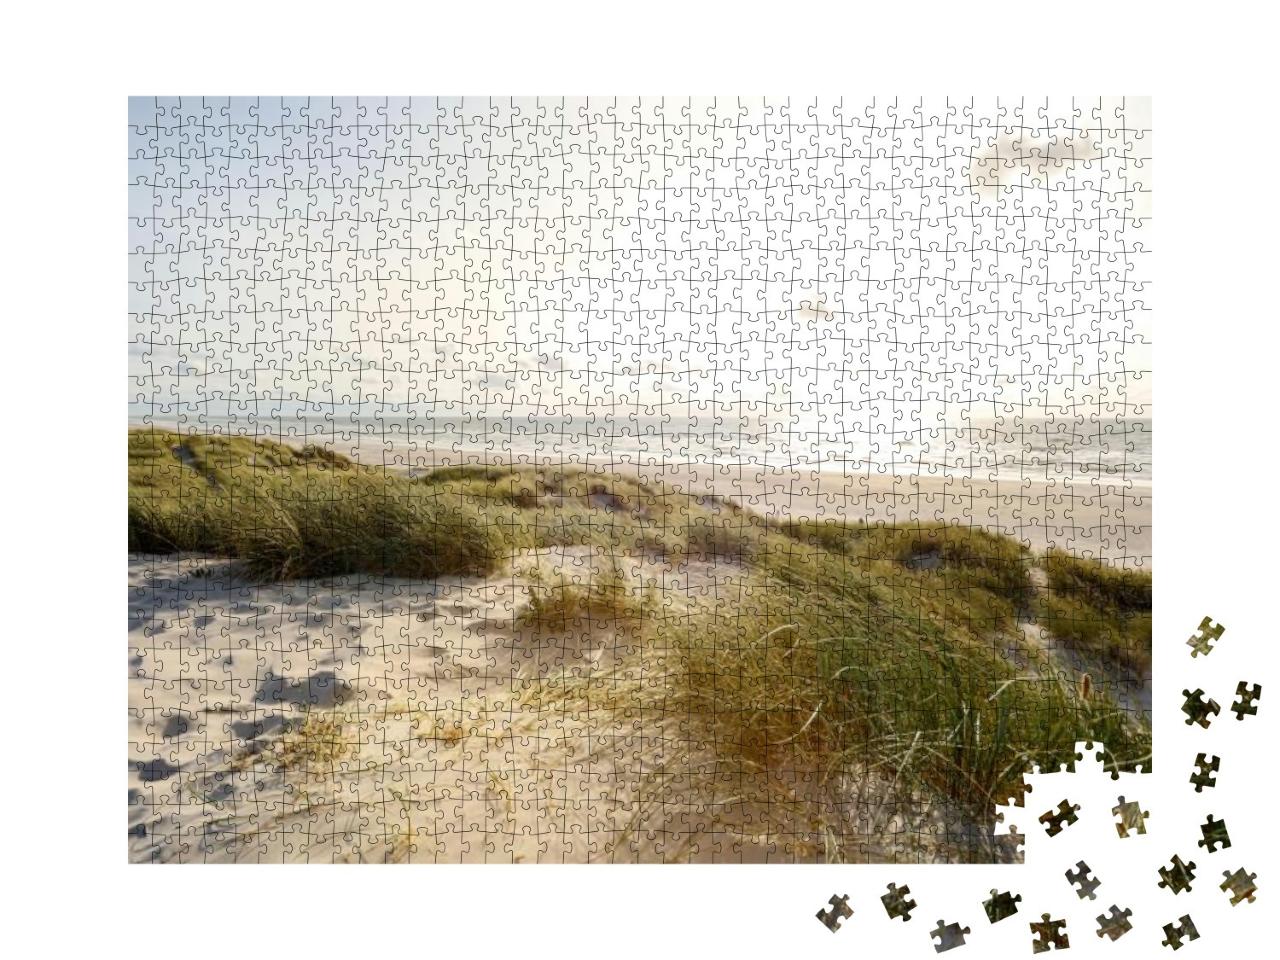 View to Beautiful Landscape with Beach & Sand Dunes Near... Jigsaw Puzzle with 1000 pieces